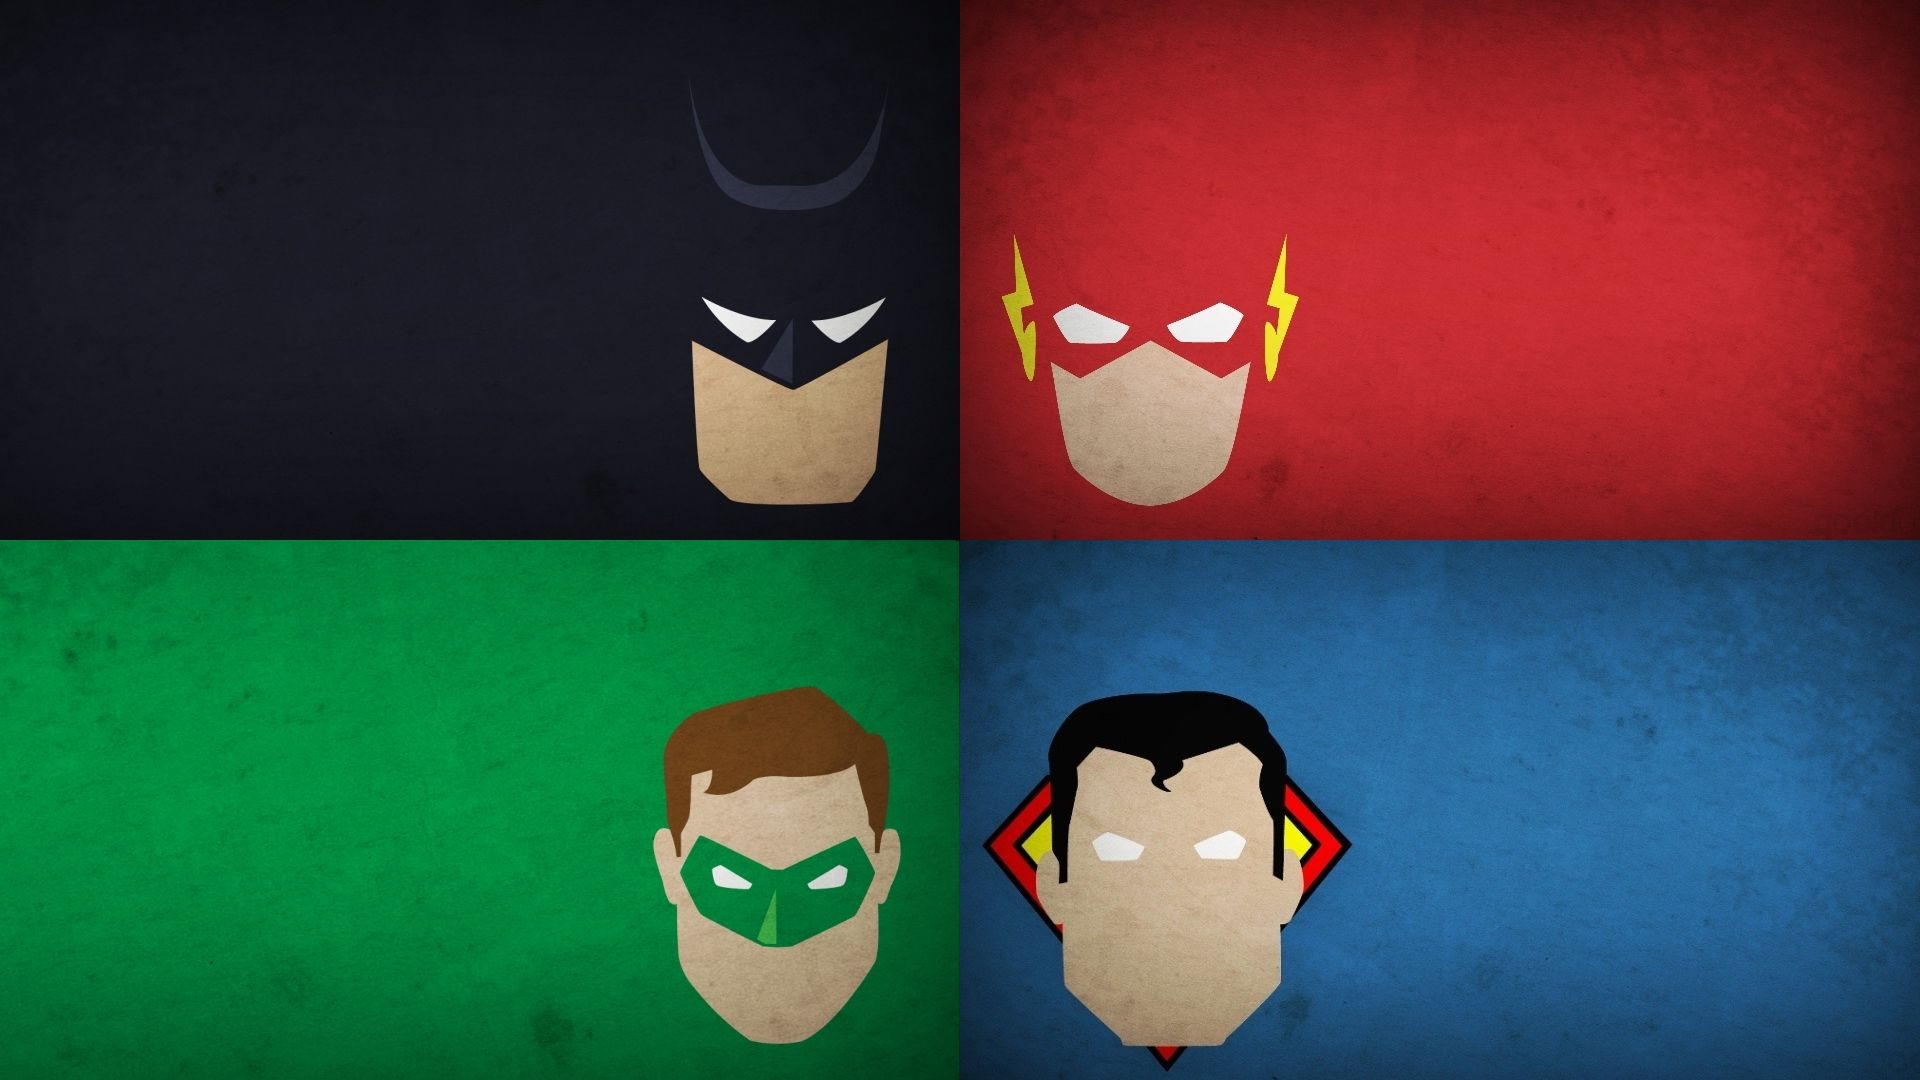 Justice League App Banners Android Homescreen by Isaiaher